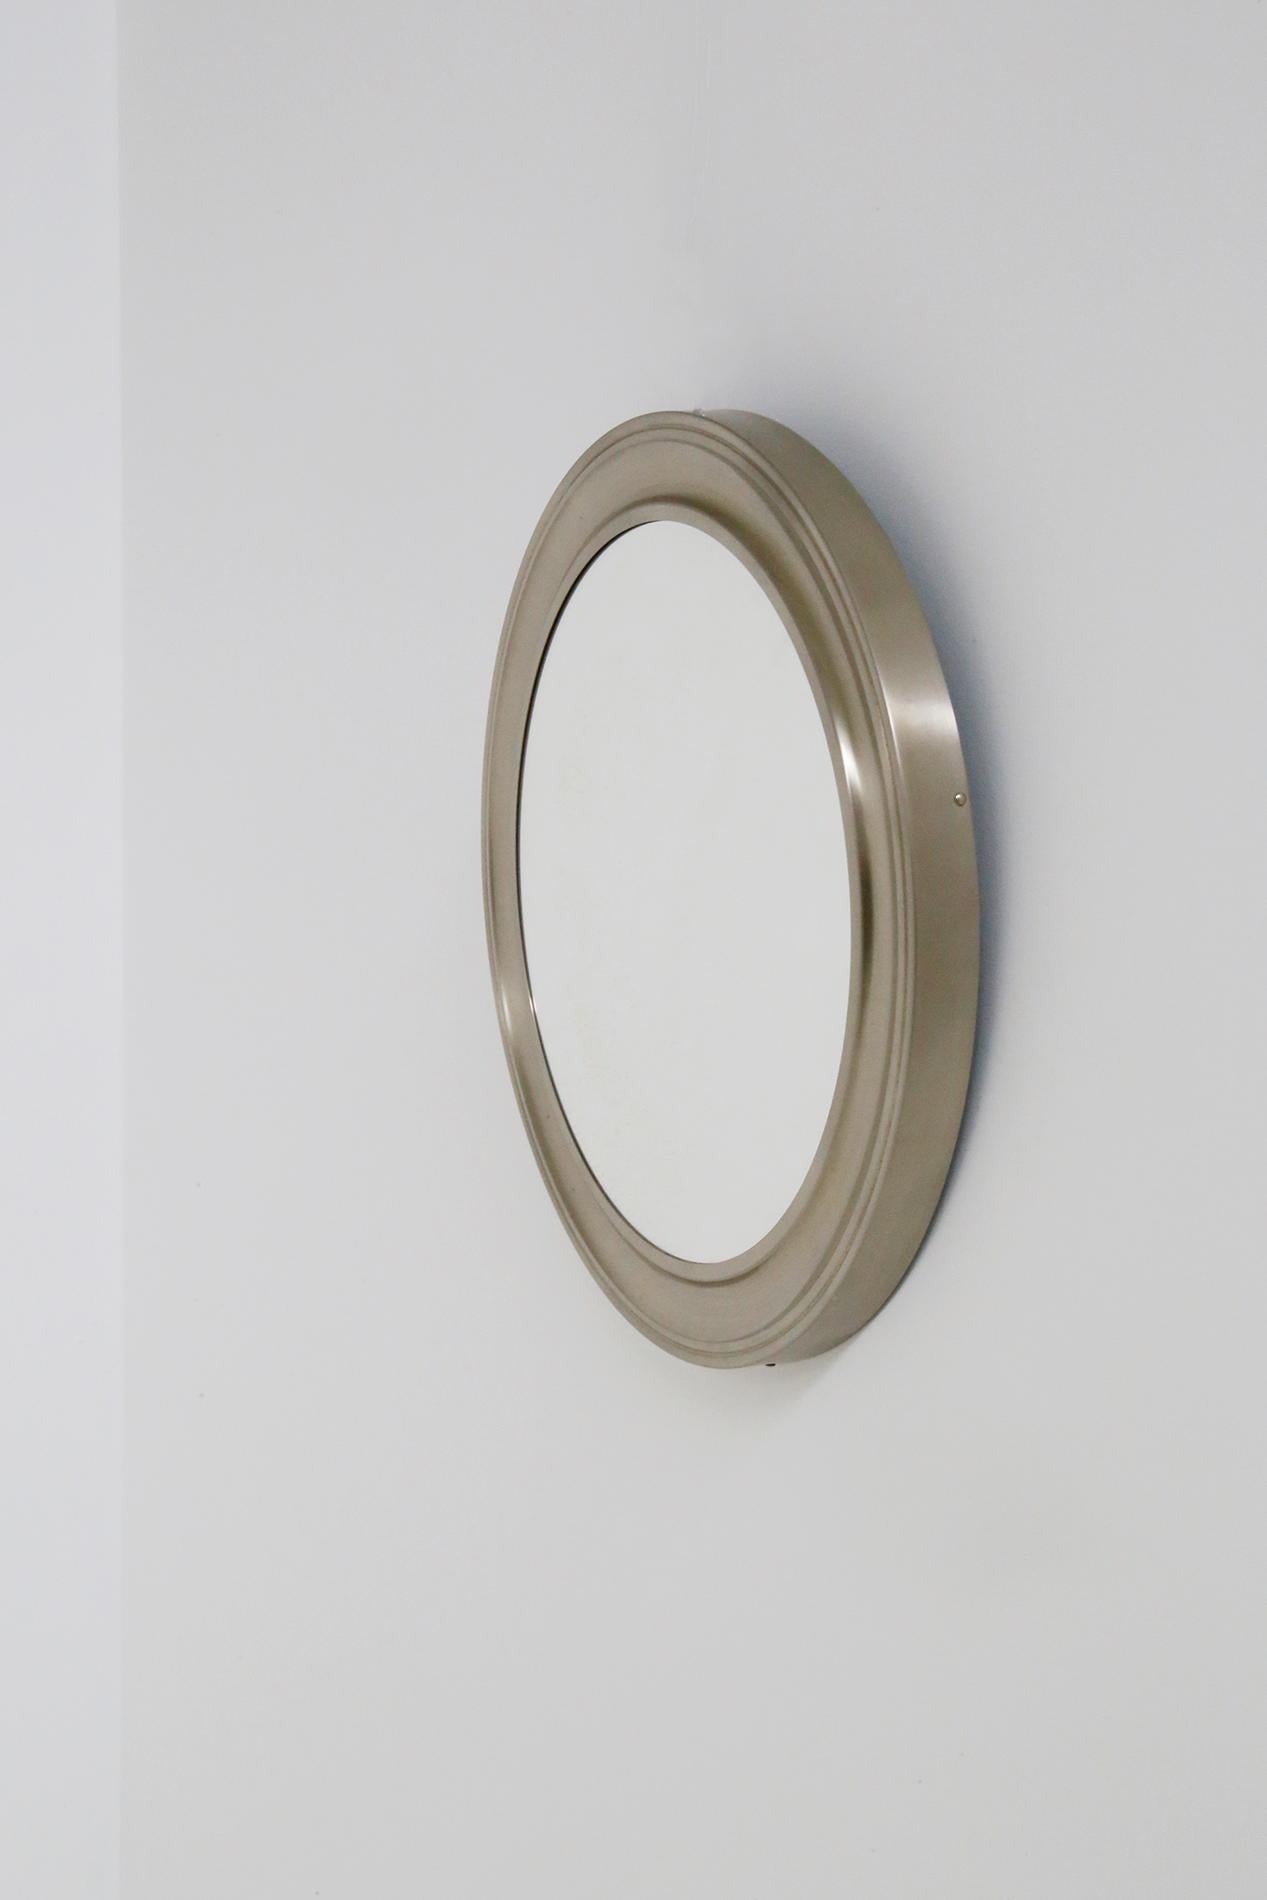 Round wall mirror by Gianni Moscatelli for Formanova in 1970. The mirror is made of silver colored nickel metal. Its metal circumference is in perfect condition. The interior is in mirrored glass. Its very modern material illuminates every kind of